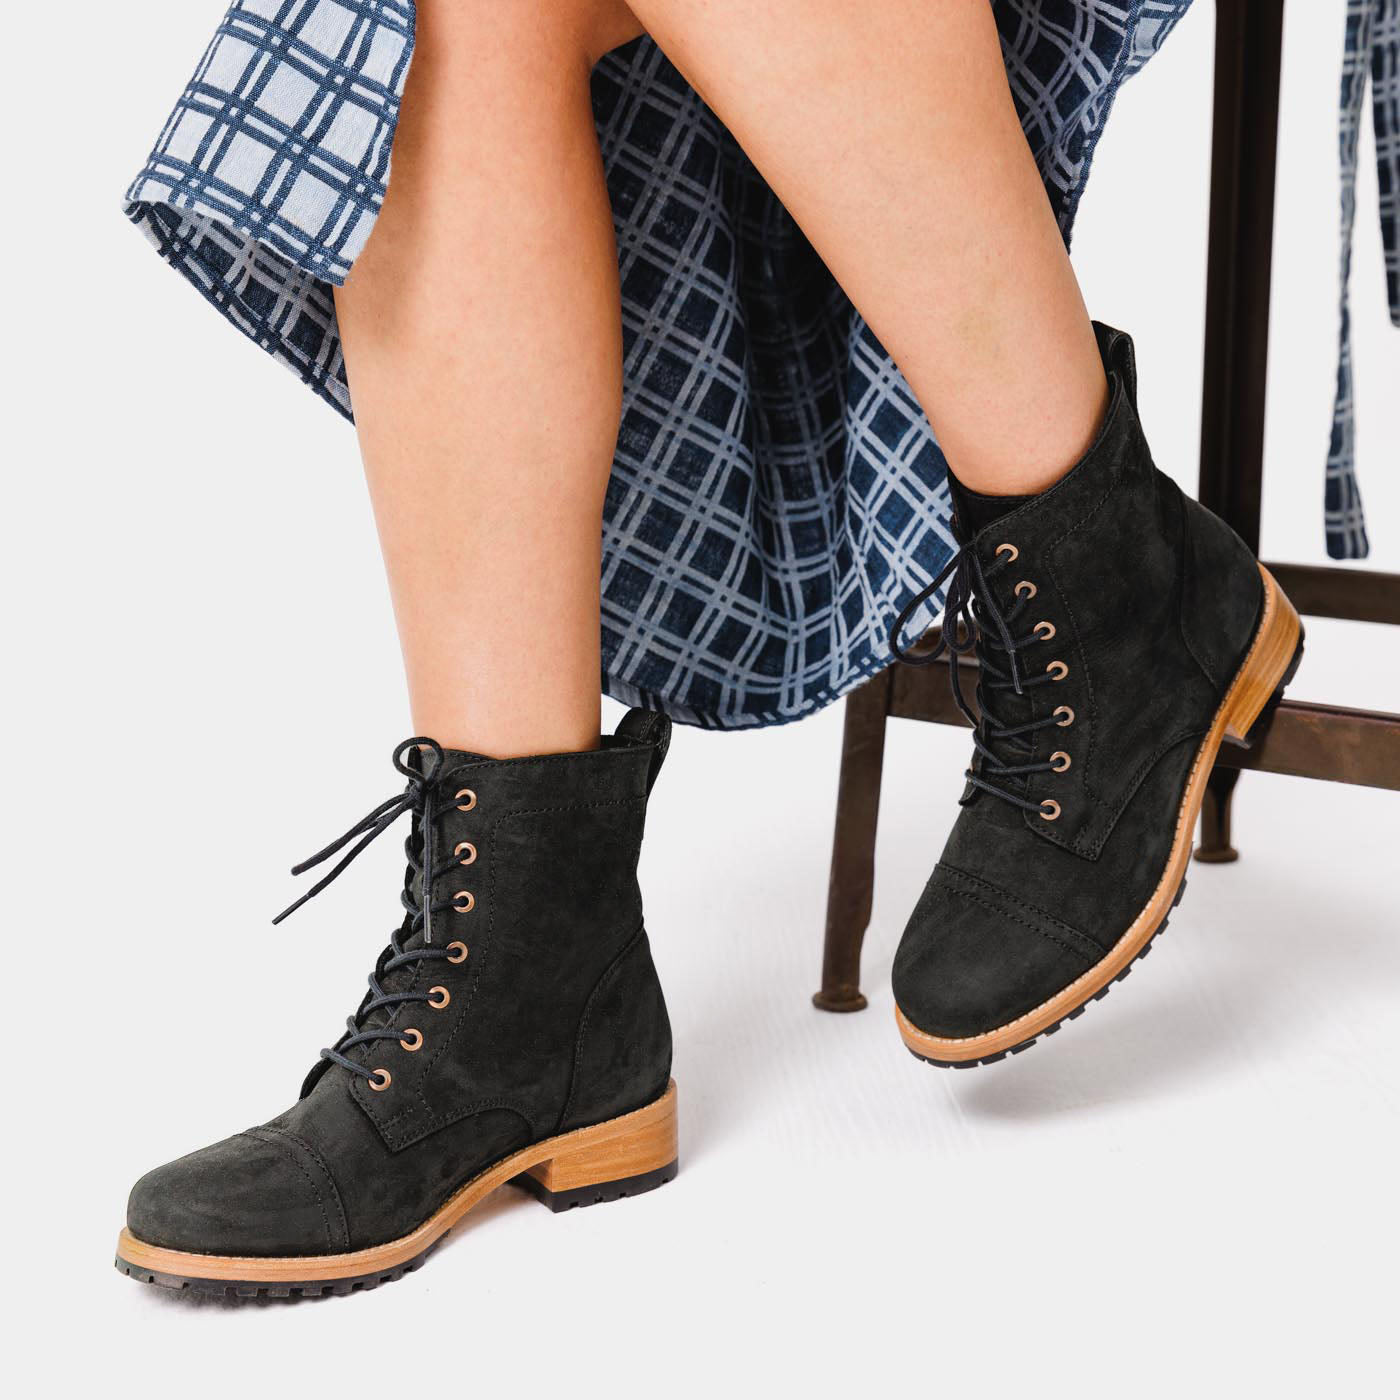 Women's Lace-up Boot